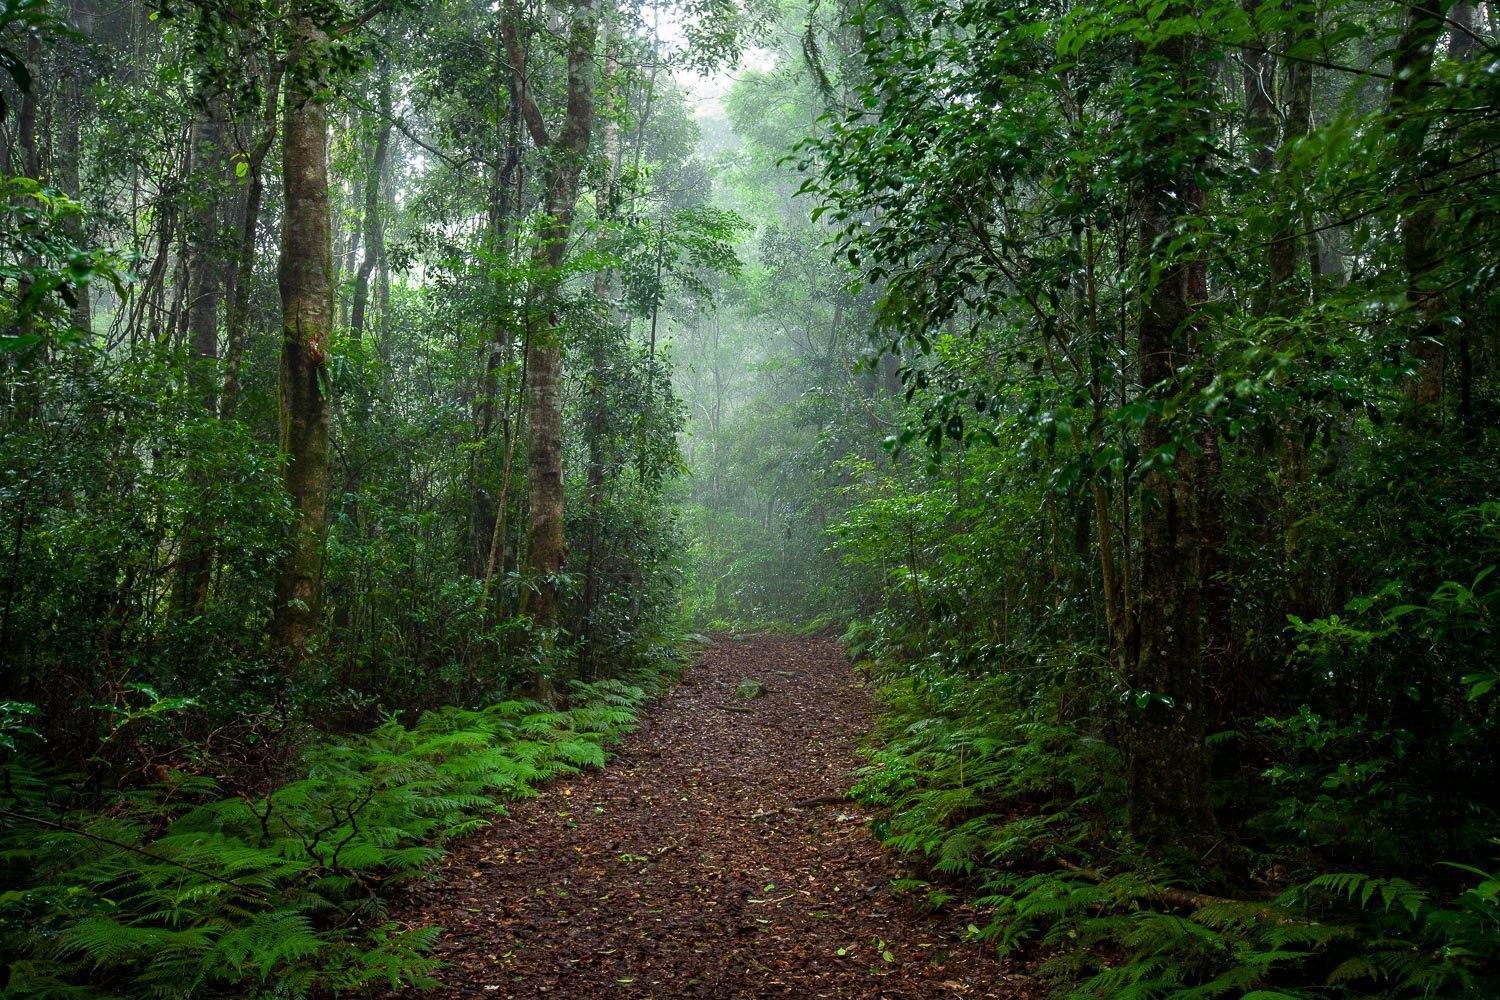 A narrow pathway in the forest between a rows of trees and plants, Lamington Mood - QLD